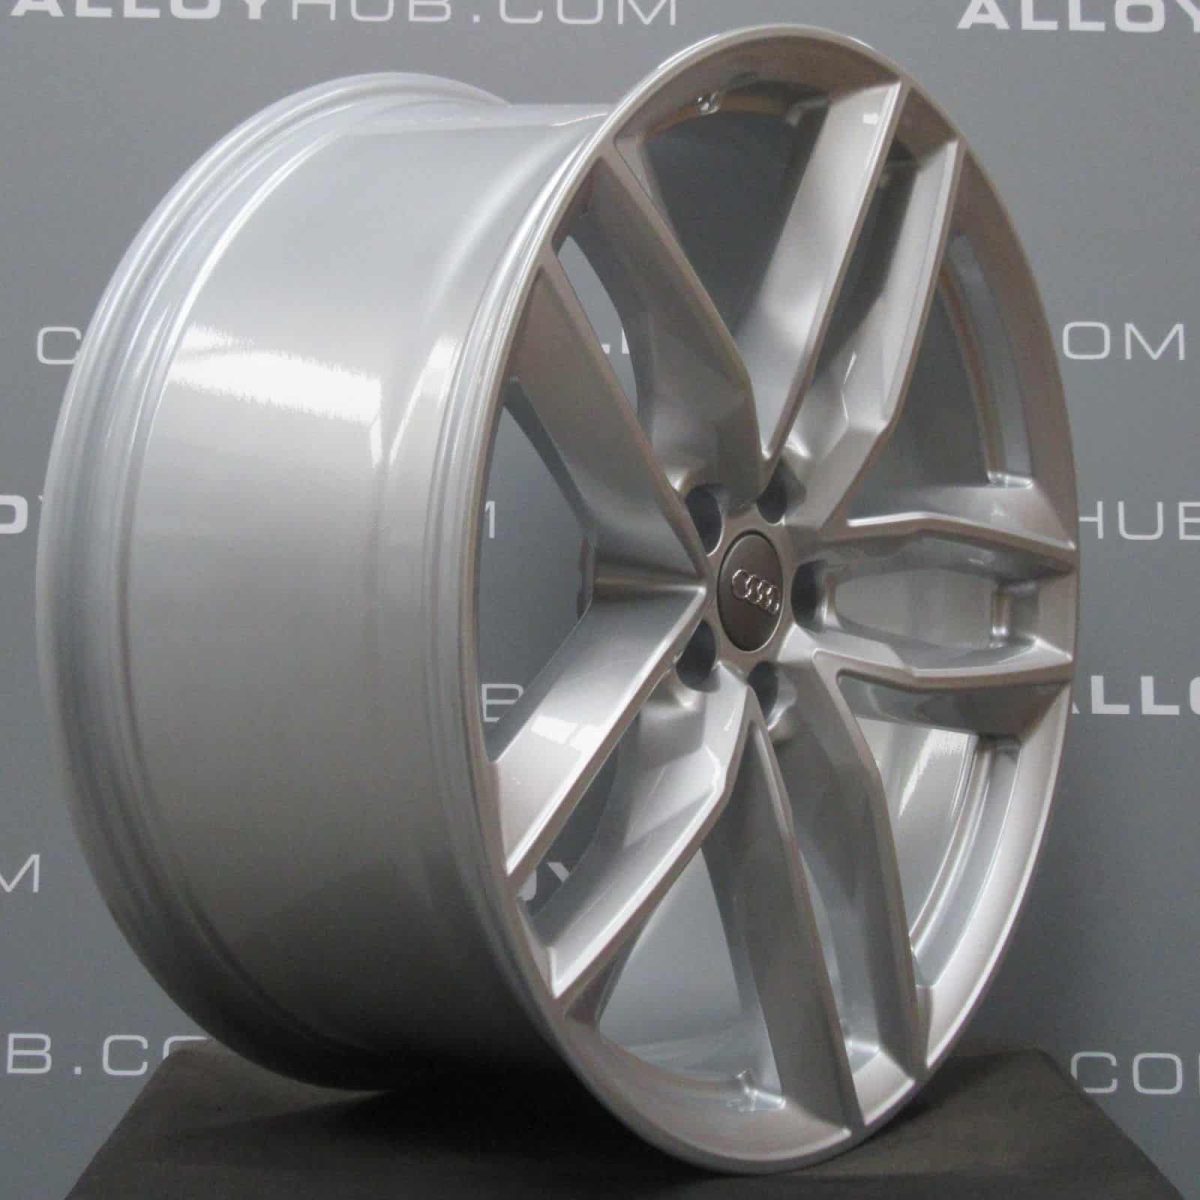 Genuine Audi Q7 4M RS 21″ Inch 5 Twin Spoke Alloy Wheels with Silver Finish 4M0 601 025 S